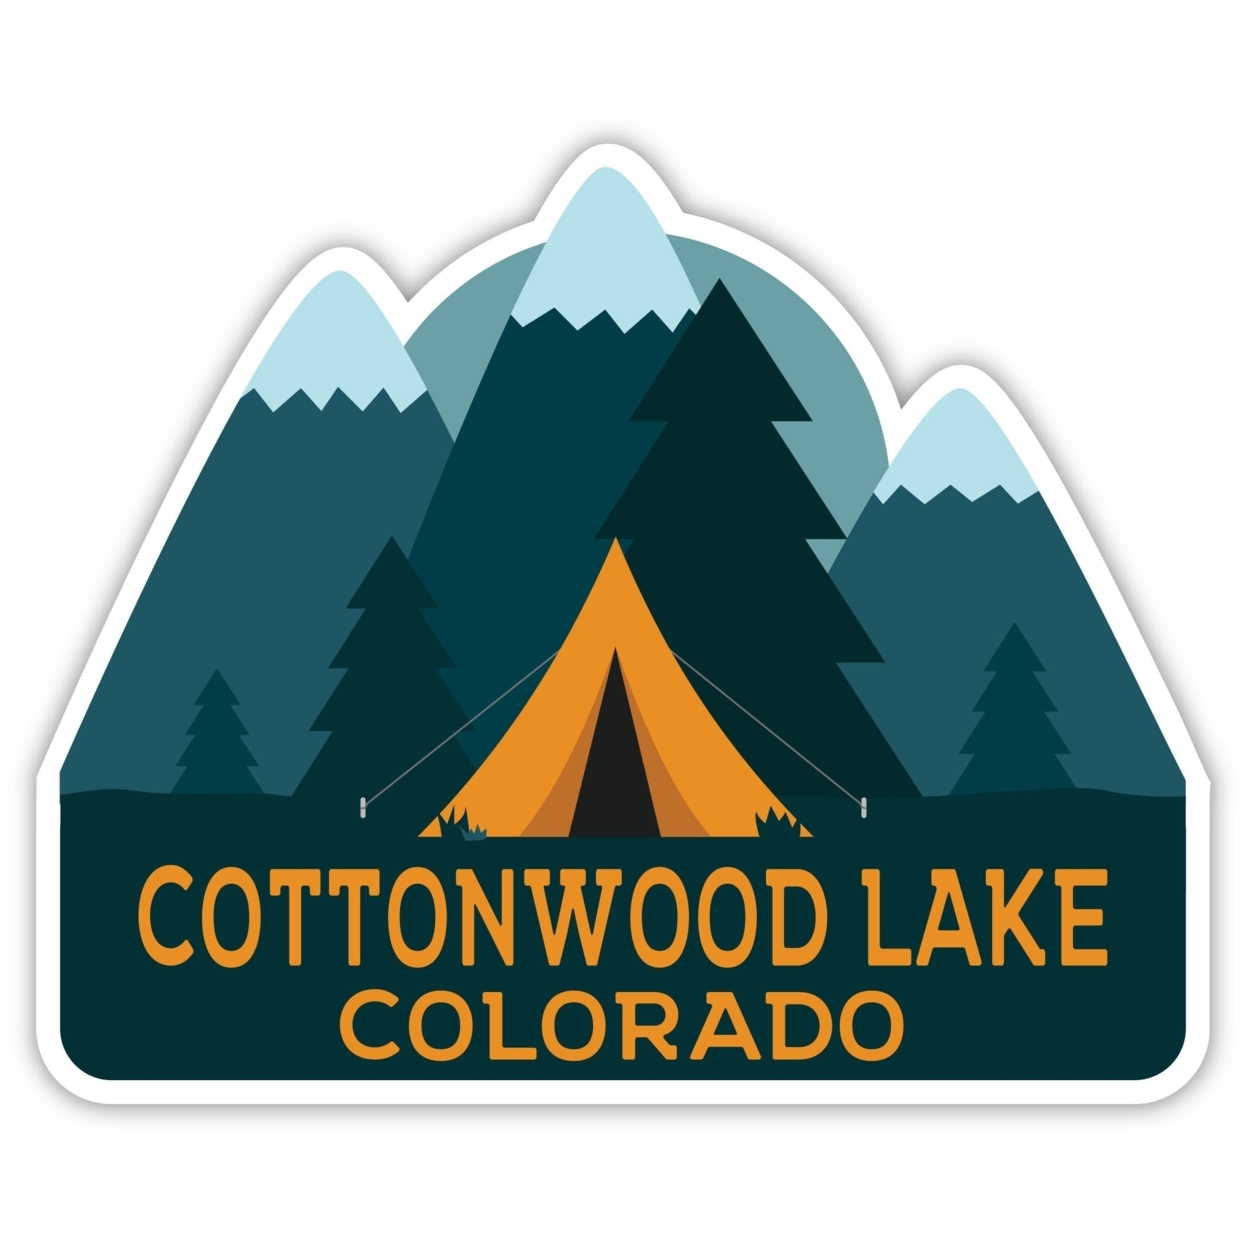 Cottonwood Lake Colorado Souvenir Decorative Stickers (Choose Theme And Size) - 4-Pack, 12-Inch, Great Outdoors